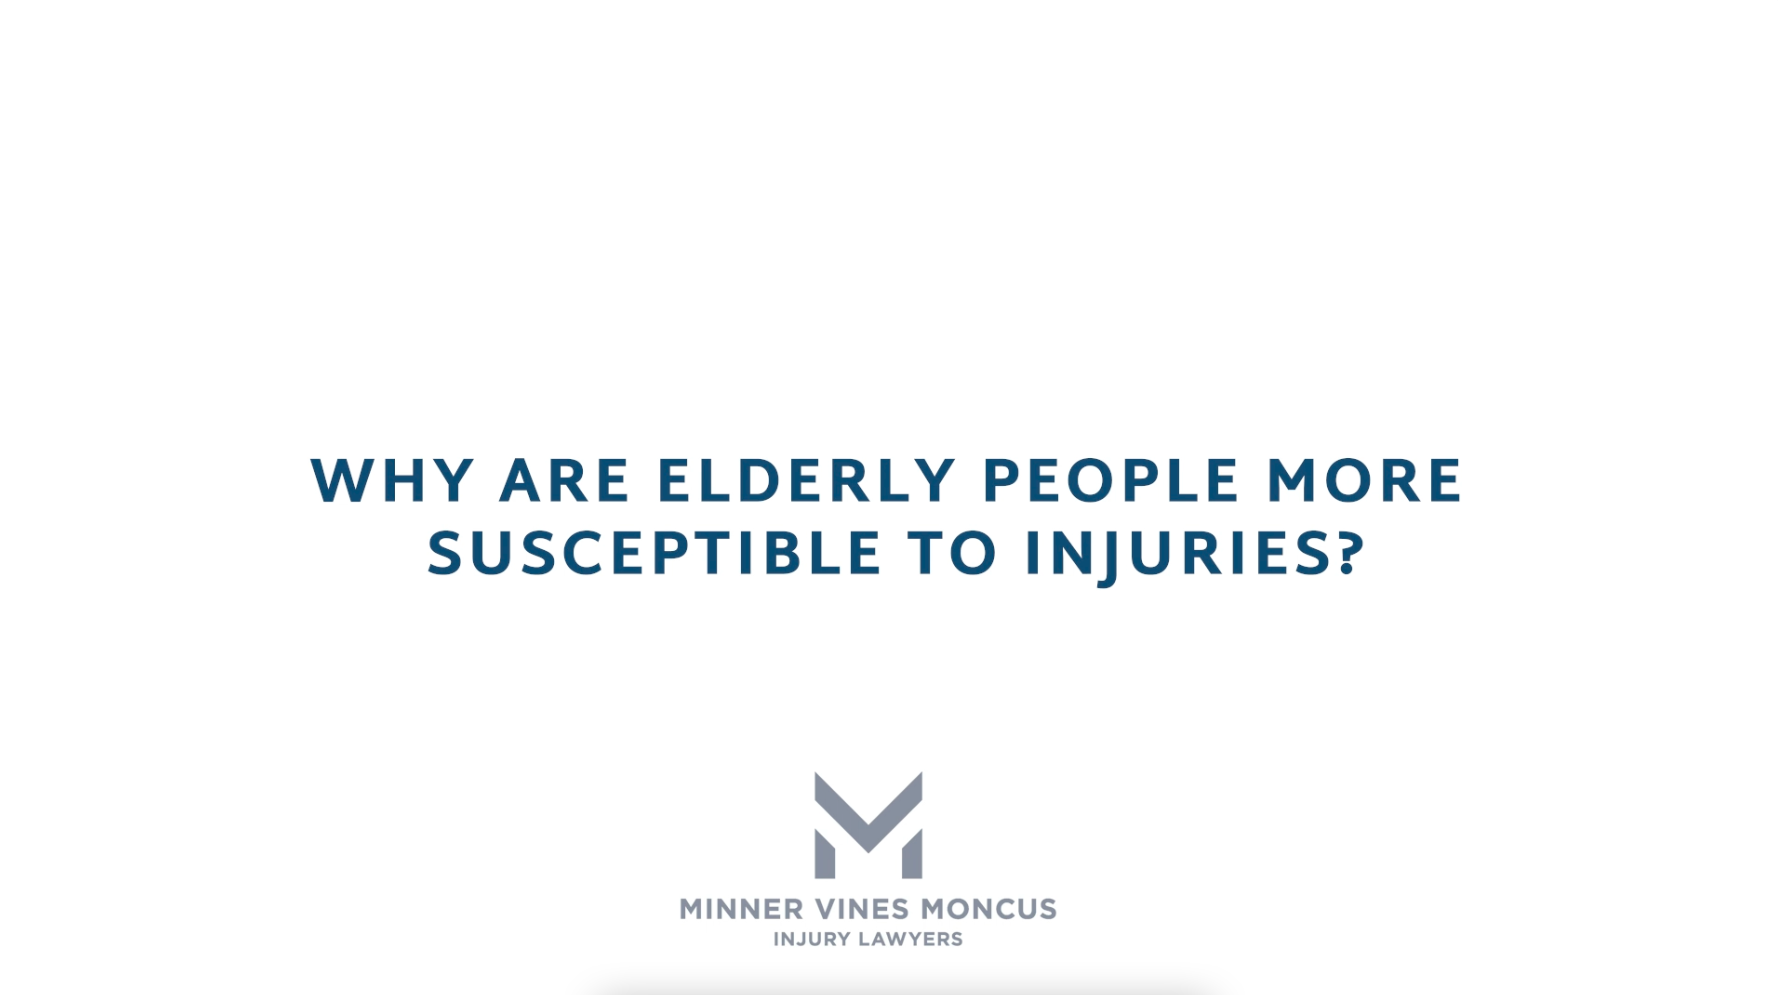 Why are elderly people more susceptible to injuries?